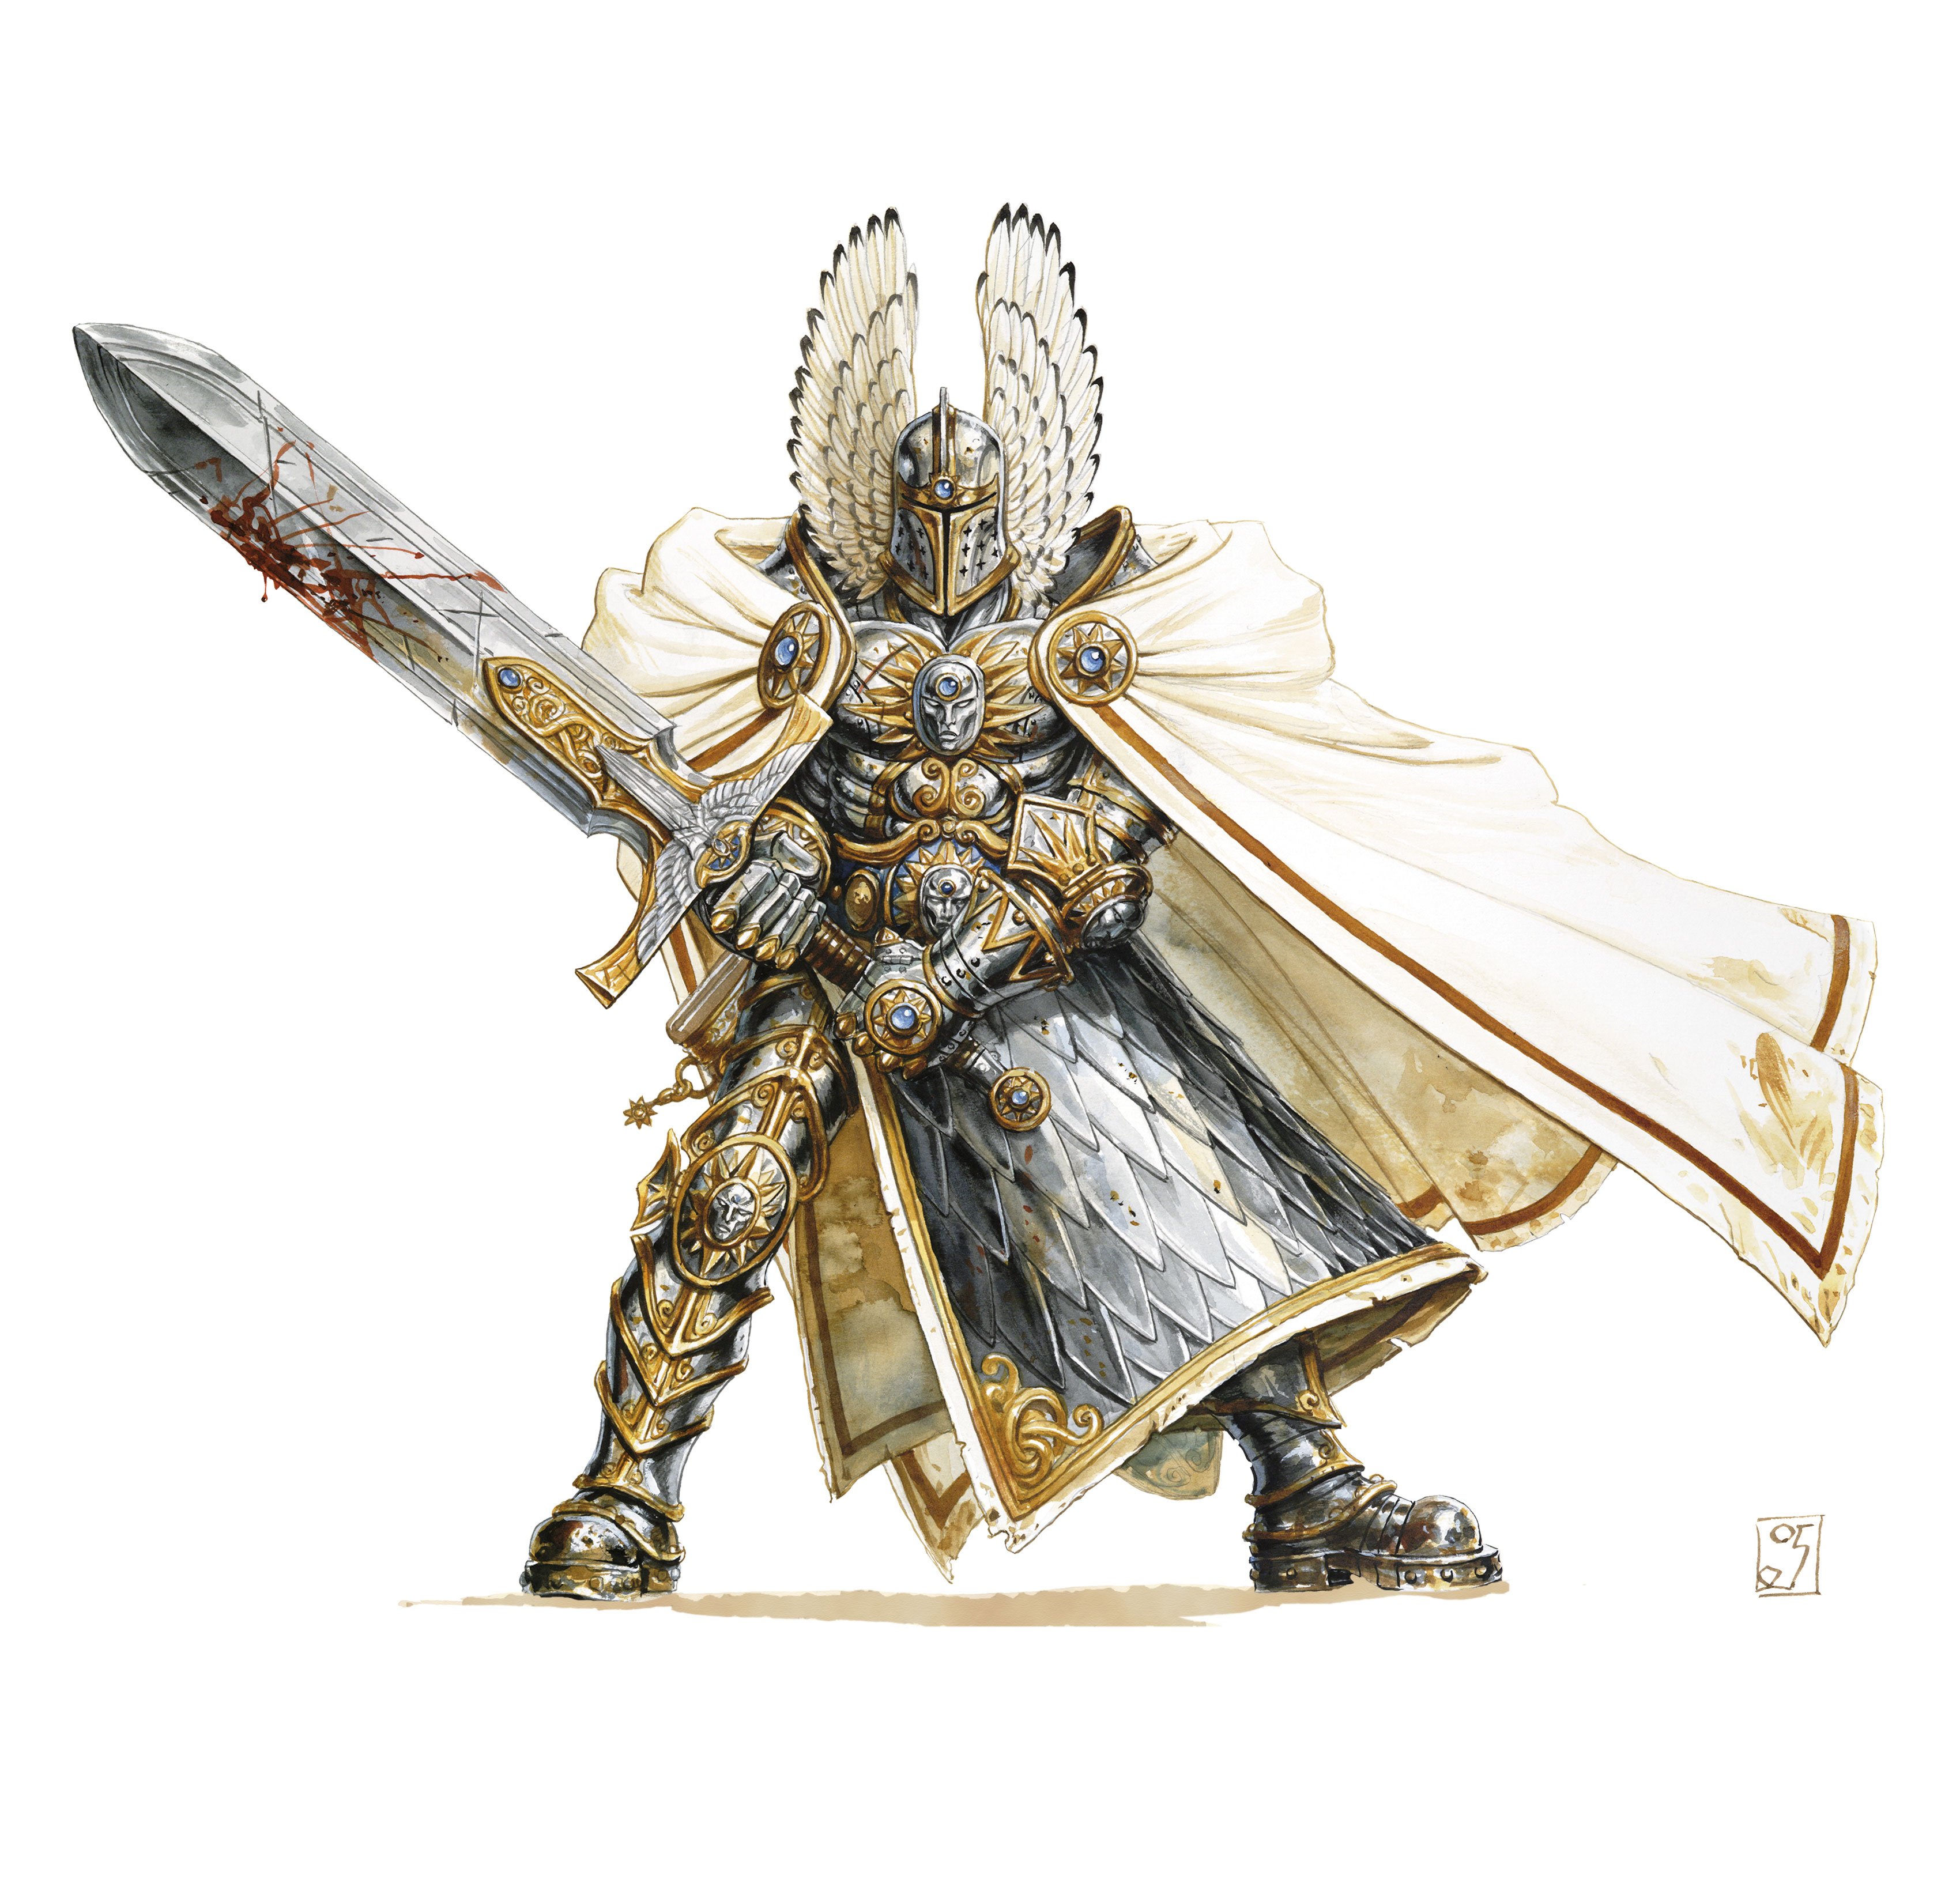 heroes, Might, Magic, Strategy, Fantasy, Fighting, Adventure, Action, Online, 1hmm, Knight, Warrior, Armor, Sword Wallpaper